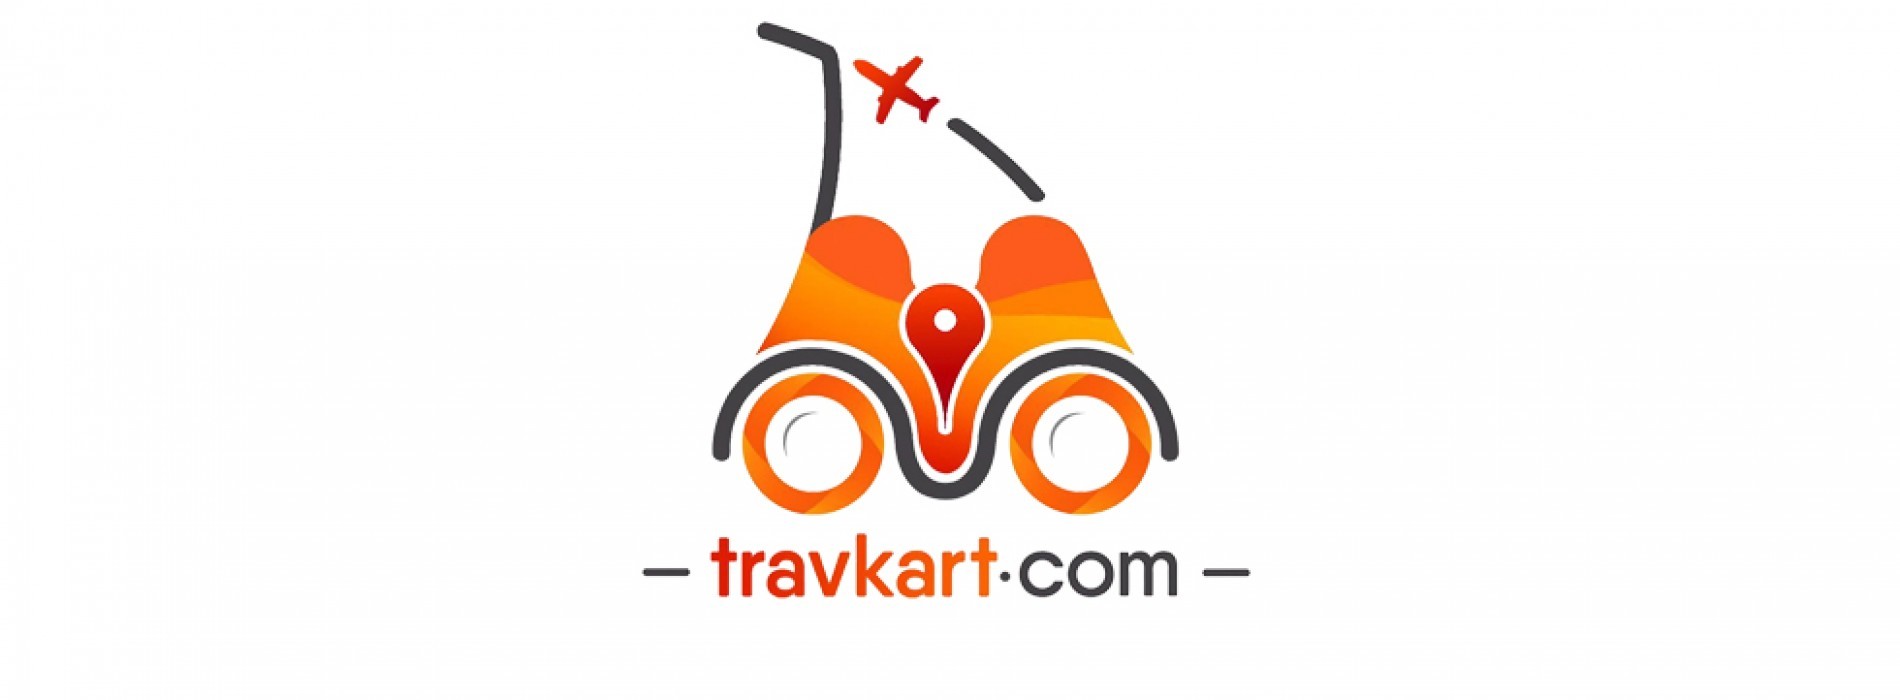 Travkart announces launch of franchisee outlet in Kamla Nagar